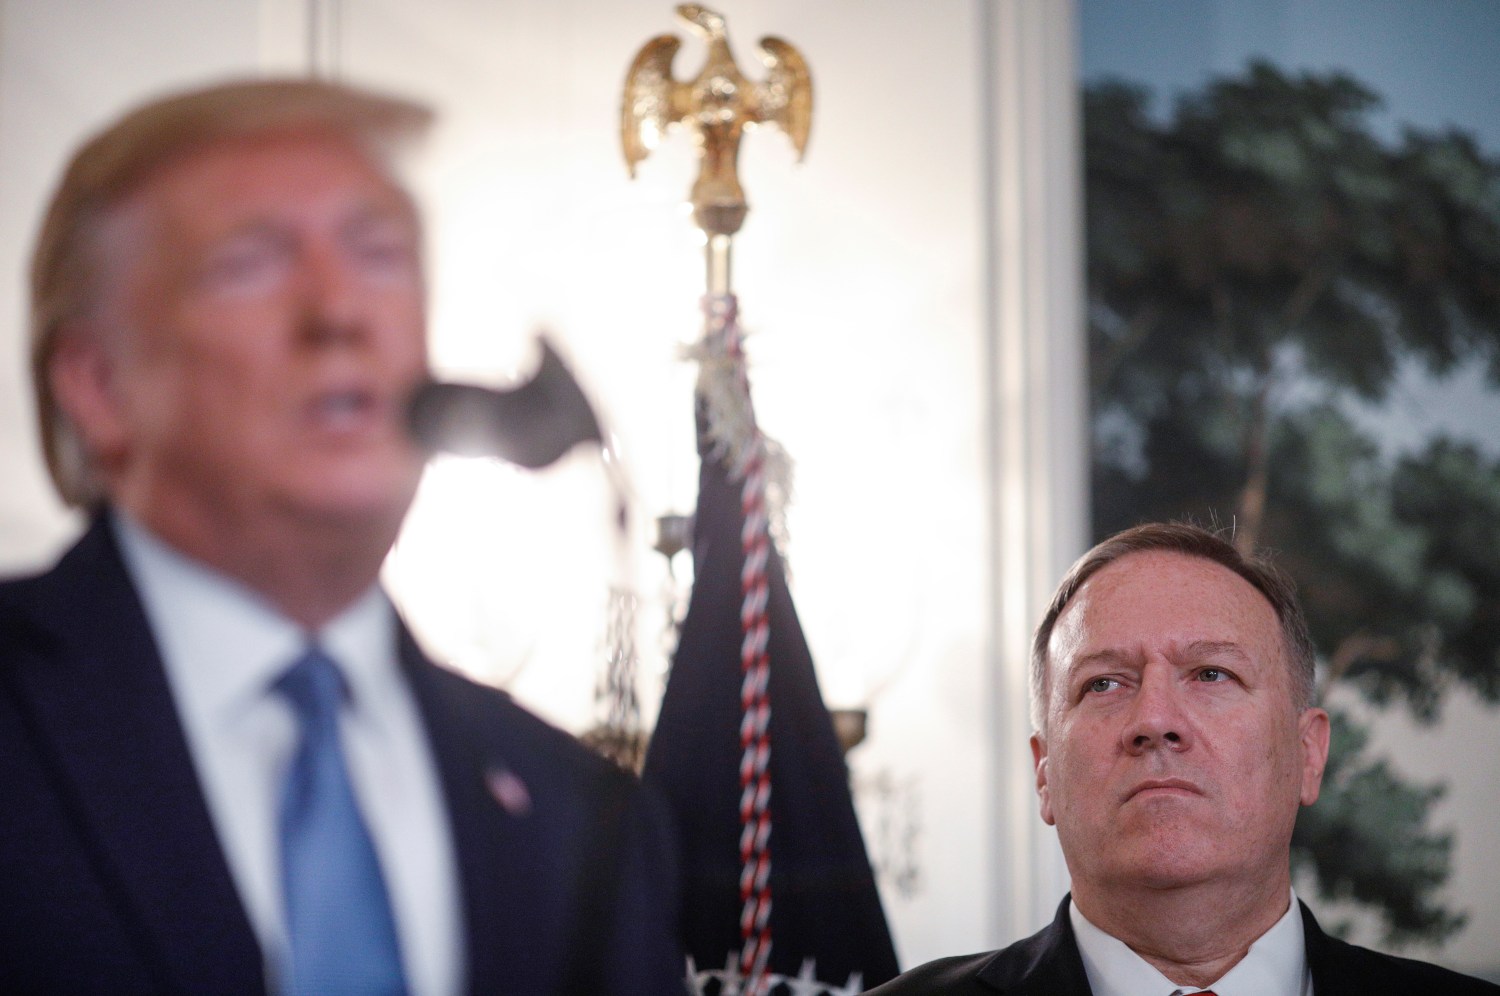 U.S. Secretary of State Mike Pompeo stands by as U.S. President Donald Trump delivers a statement on the conflict in Syria in the Diplomatic Room of the White House in Washington, U.S., October 23, 2019. REUTERS/Tom Brenner